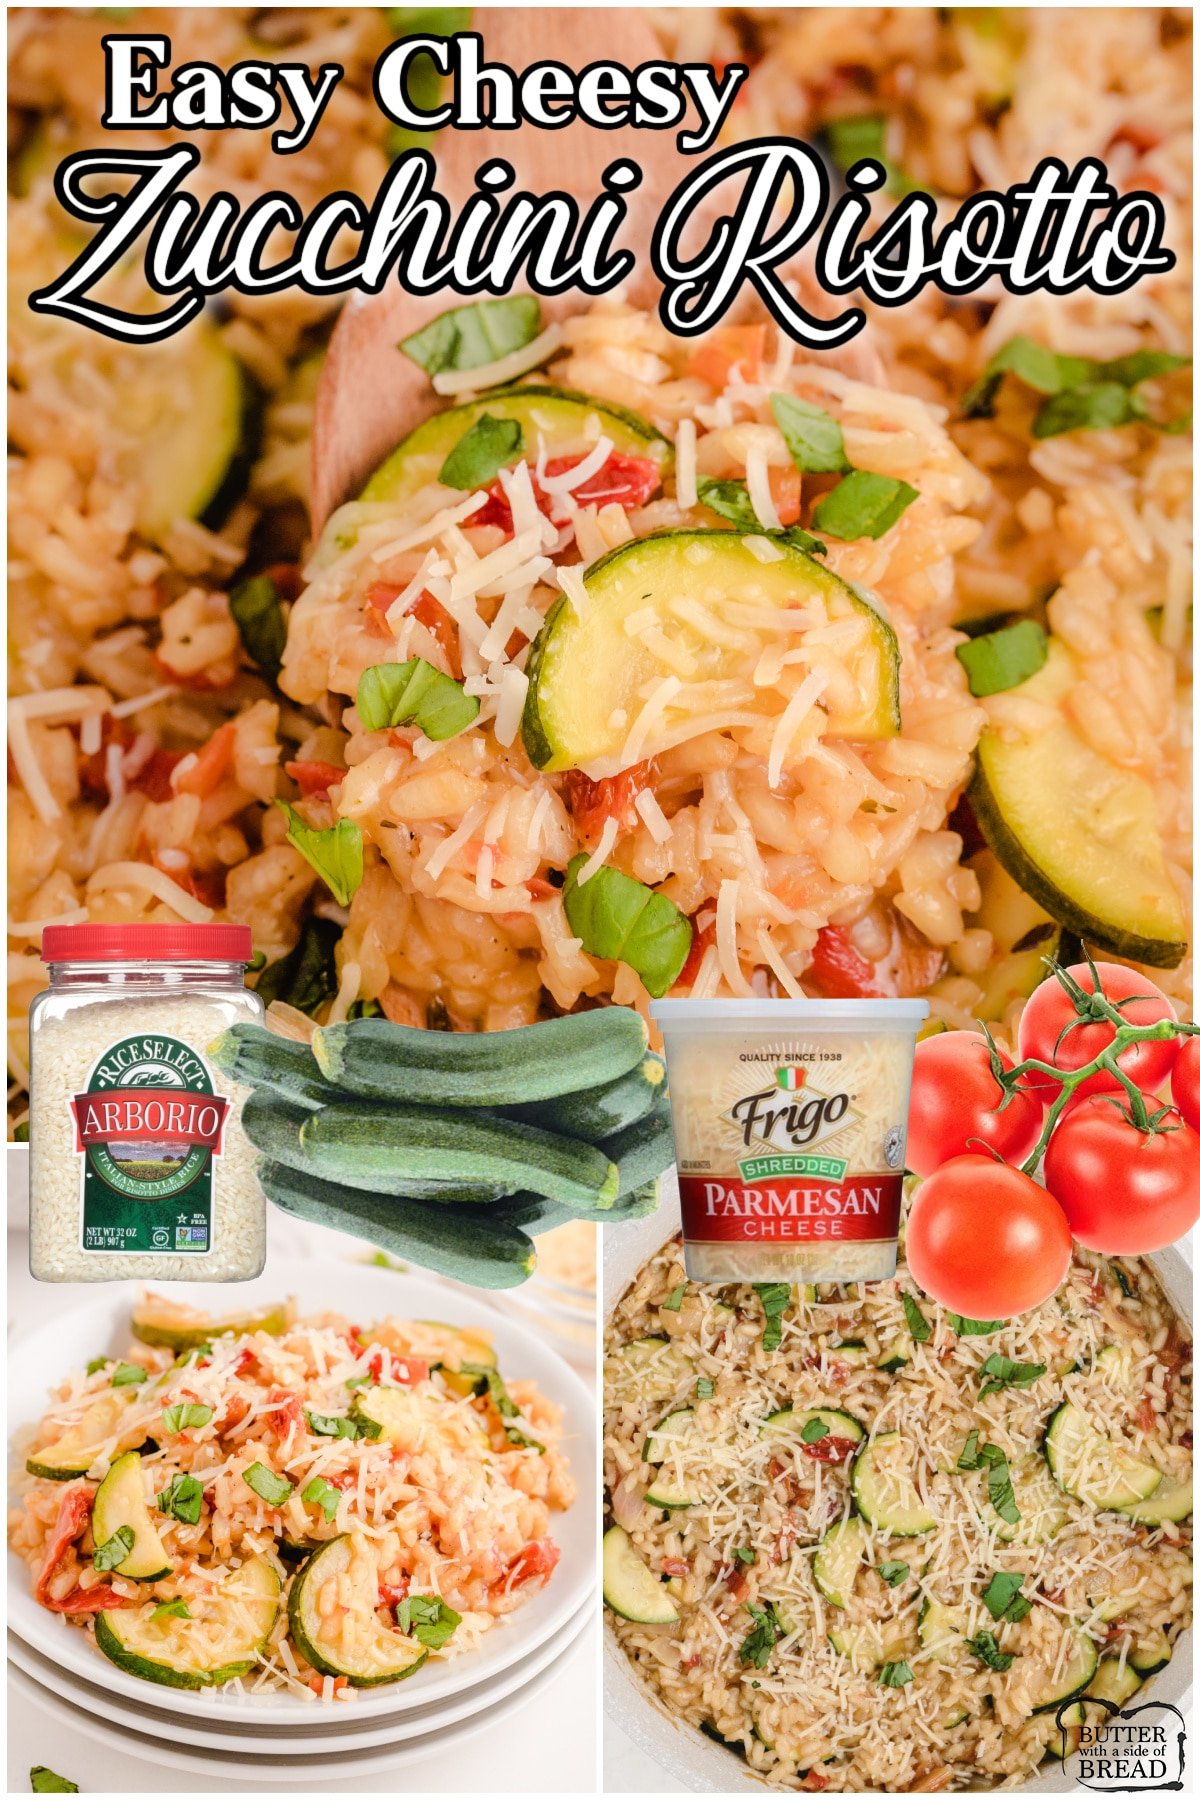 Zucchini risotto is simple, comforting dish made with rice, fresh vegetables, cheese & savory herbs.  Perfect zucchini side dish or main dish that both hearty & healthy, with tons of flavor!